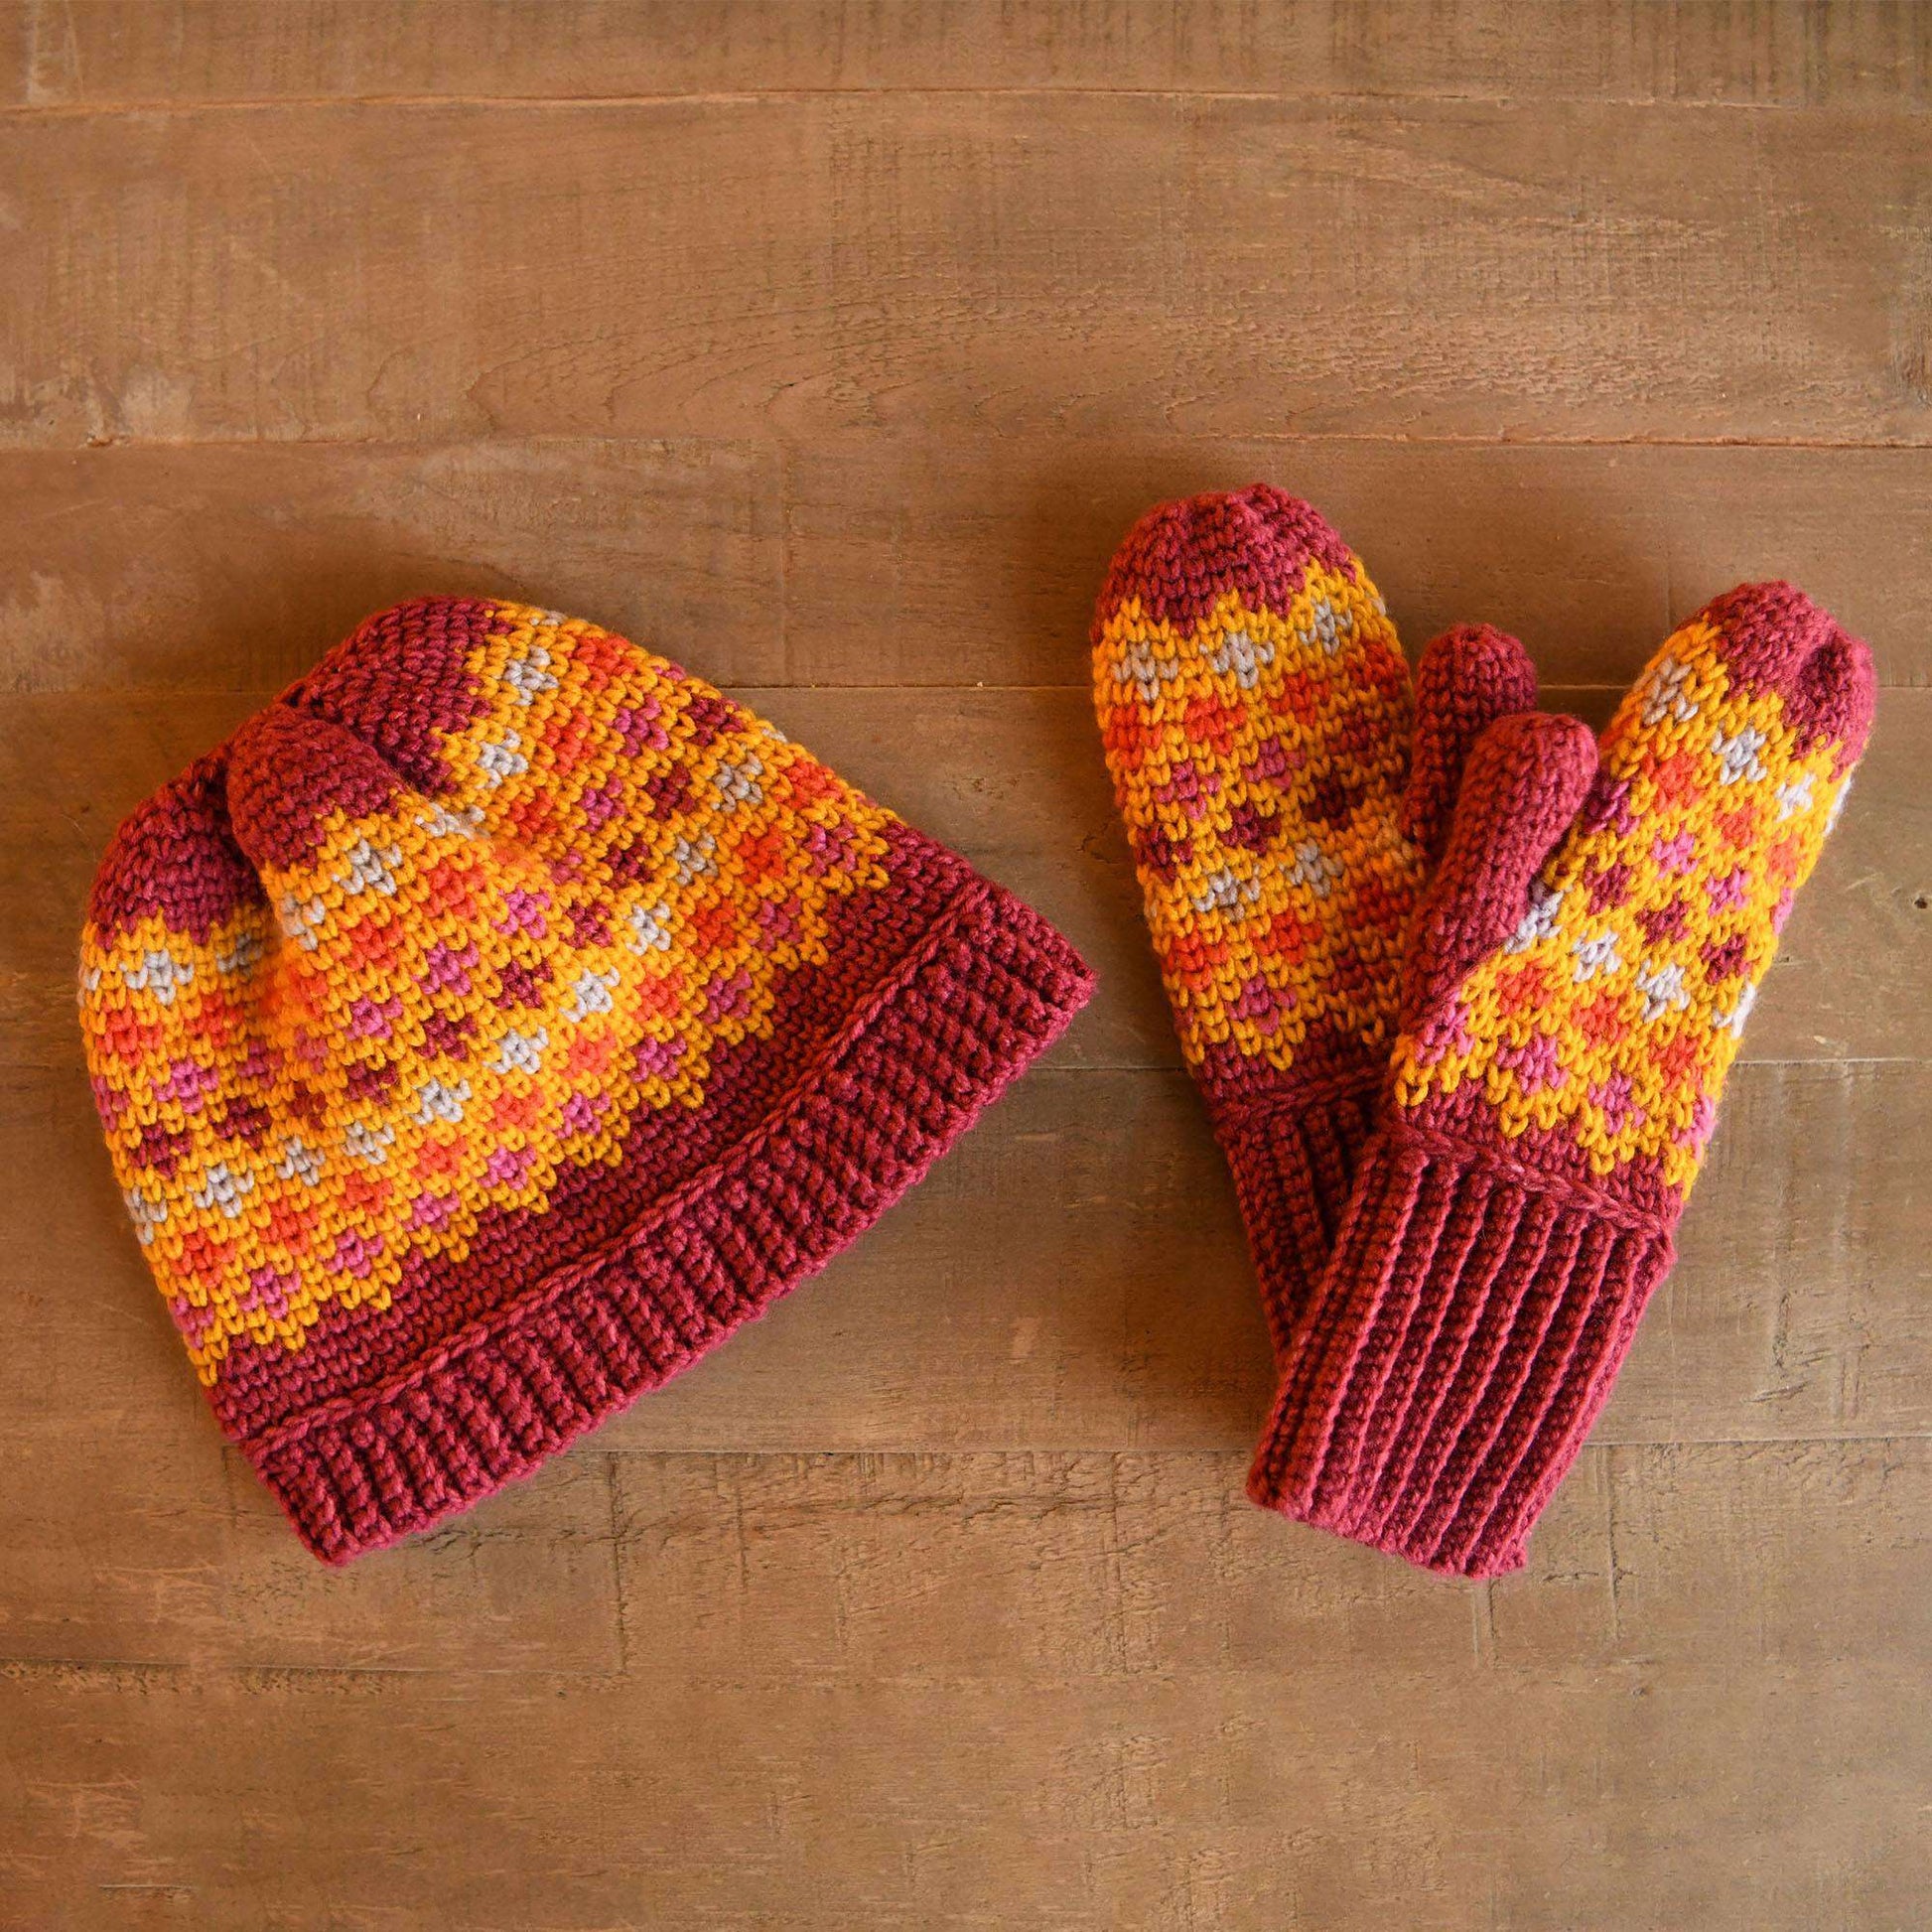 How To Crochet Hat Scarf & Mittens - Free Patterns